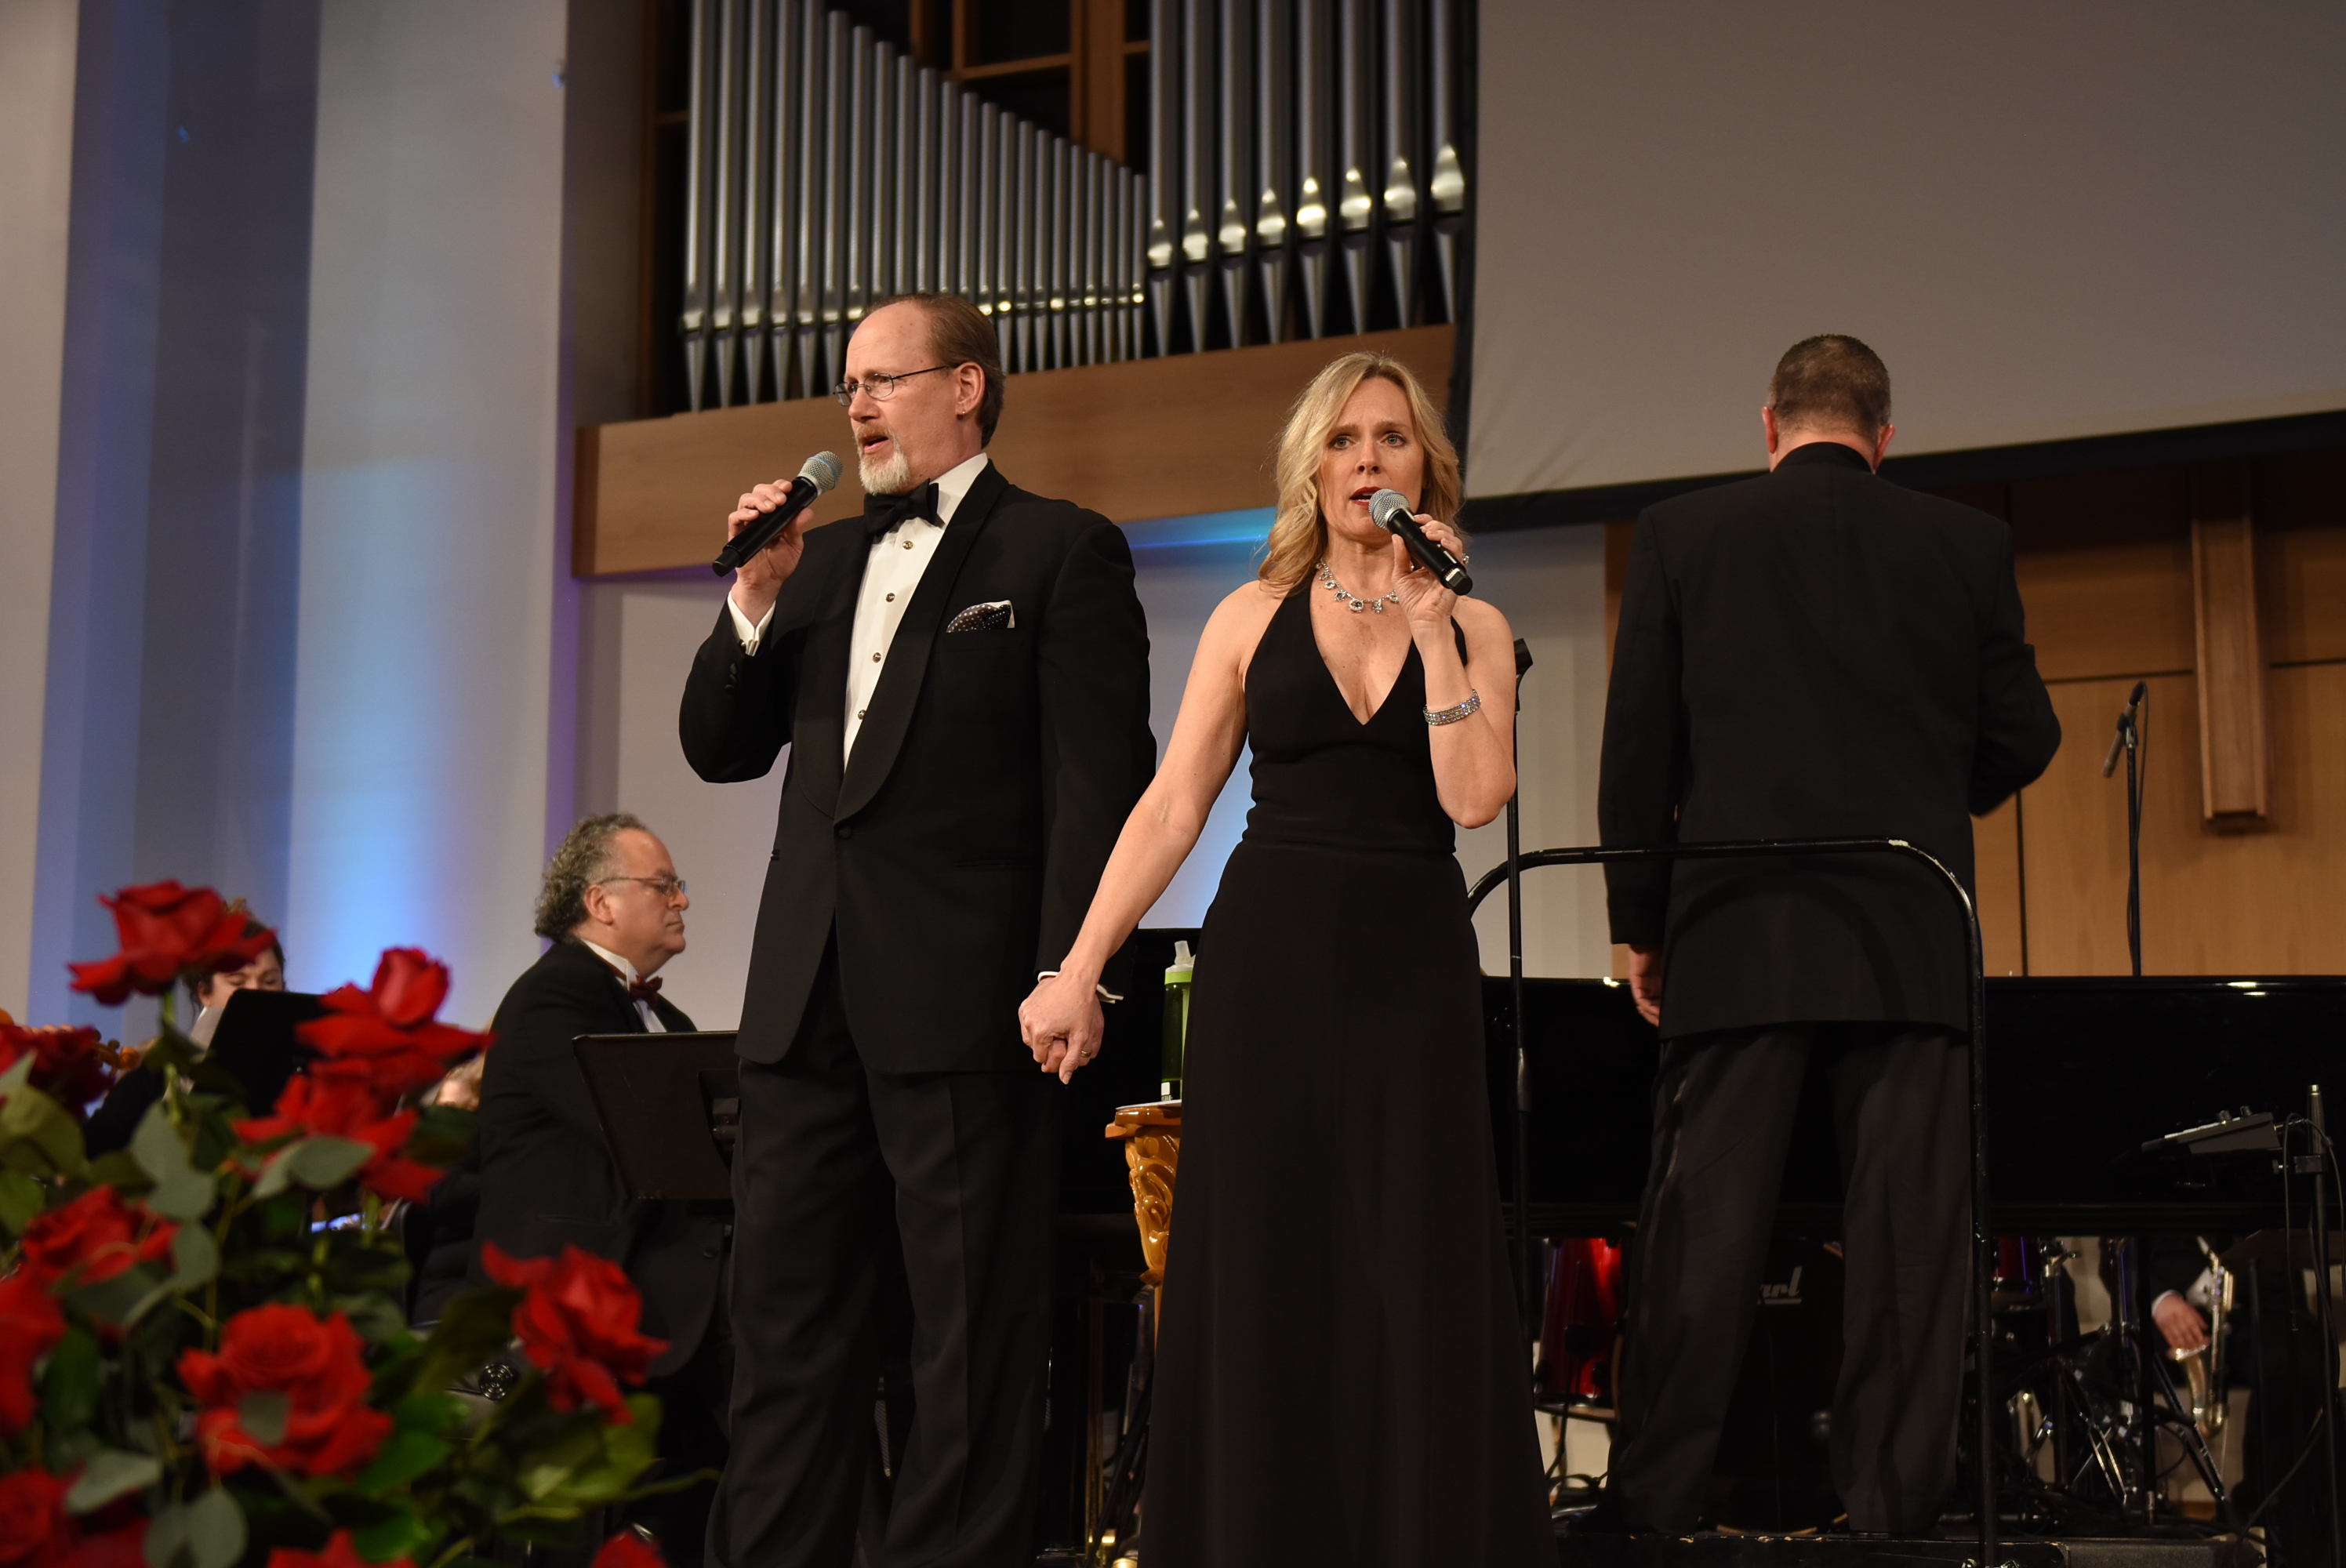 After the 10th Annual Diamond Derby Rose Gala Broadway Comes to the Bluegrass, the  Broadway performer J. Mark McVey and his wife Christy Tarr-McVey performed a concert with the CU Orchestra. (CU Photo by Ariel Emberton) 